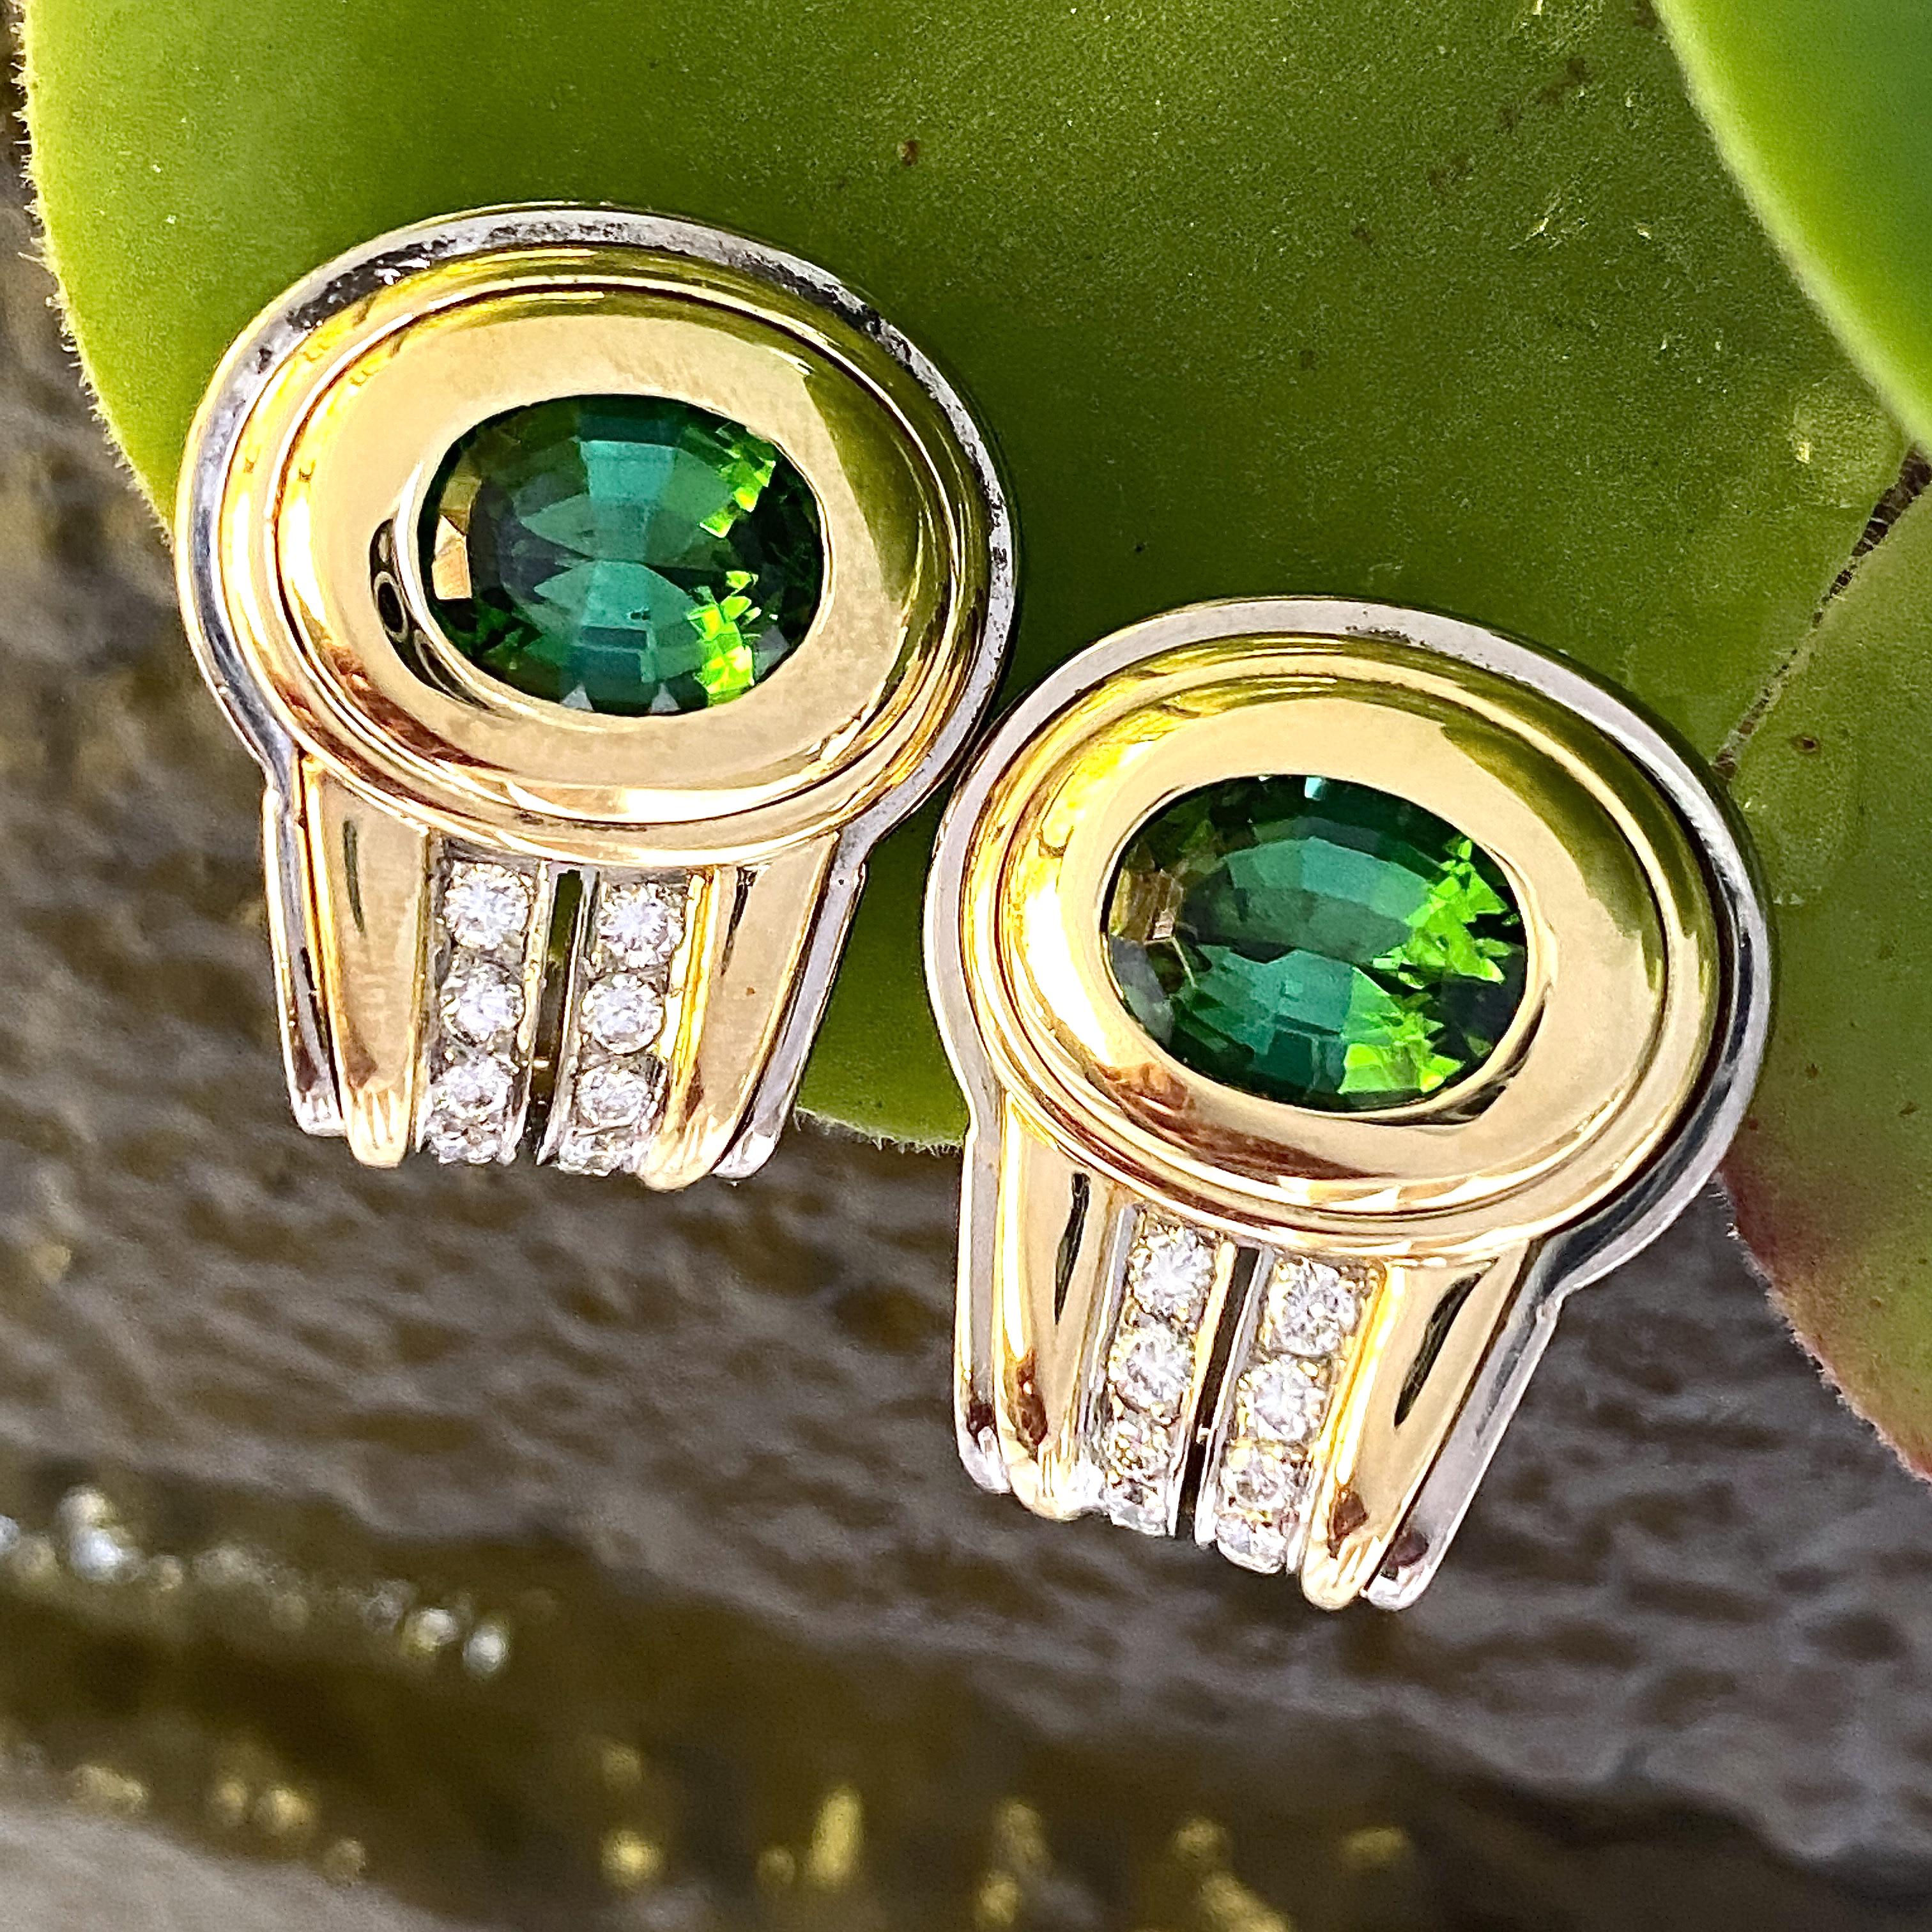 Green Tourmaline Omega Clip Post Earrings with White Diamonds in 18 Karat Gold In Excellent Condition For Sale In Sherman Oaks, CA